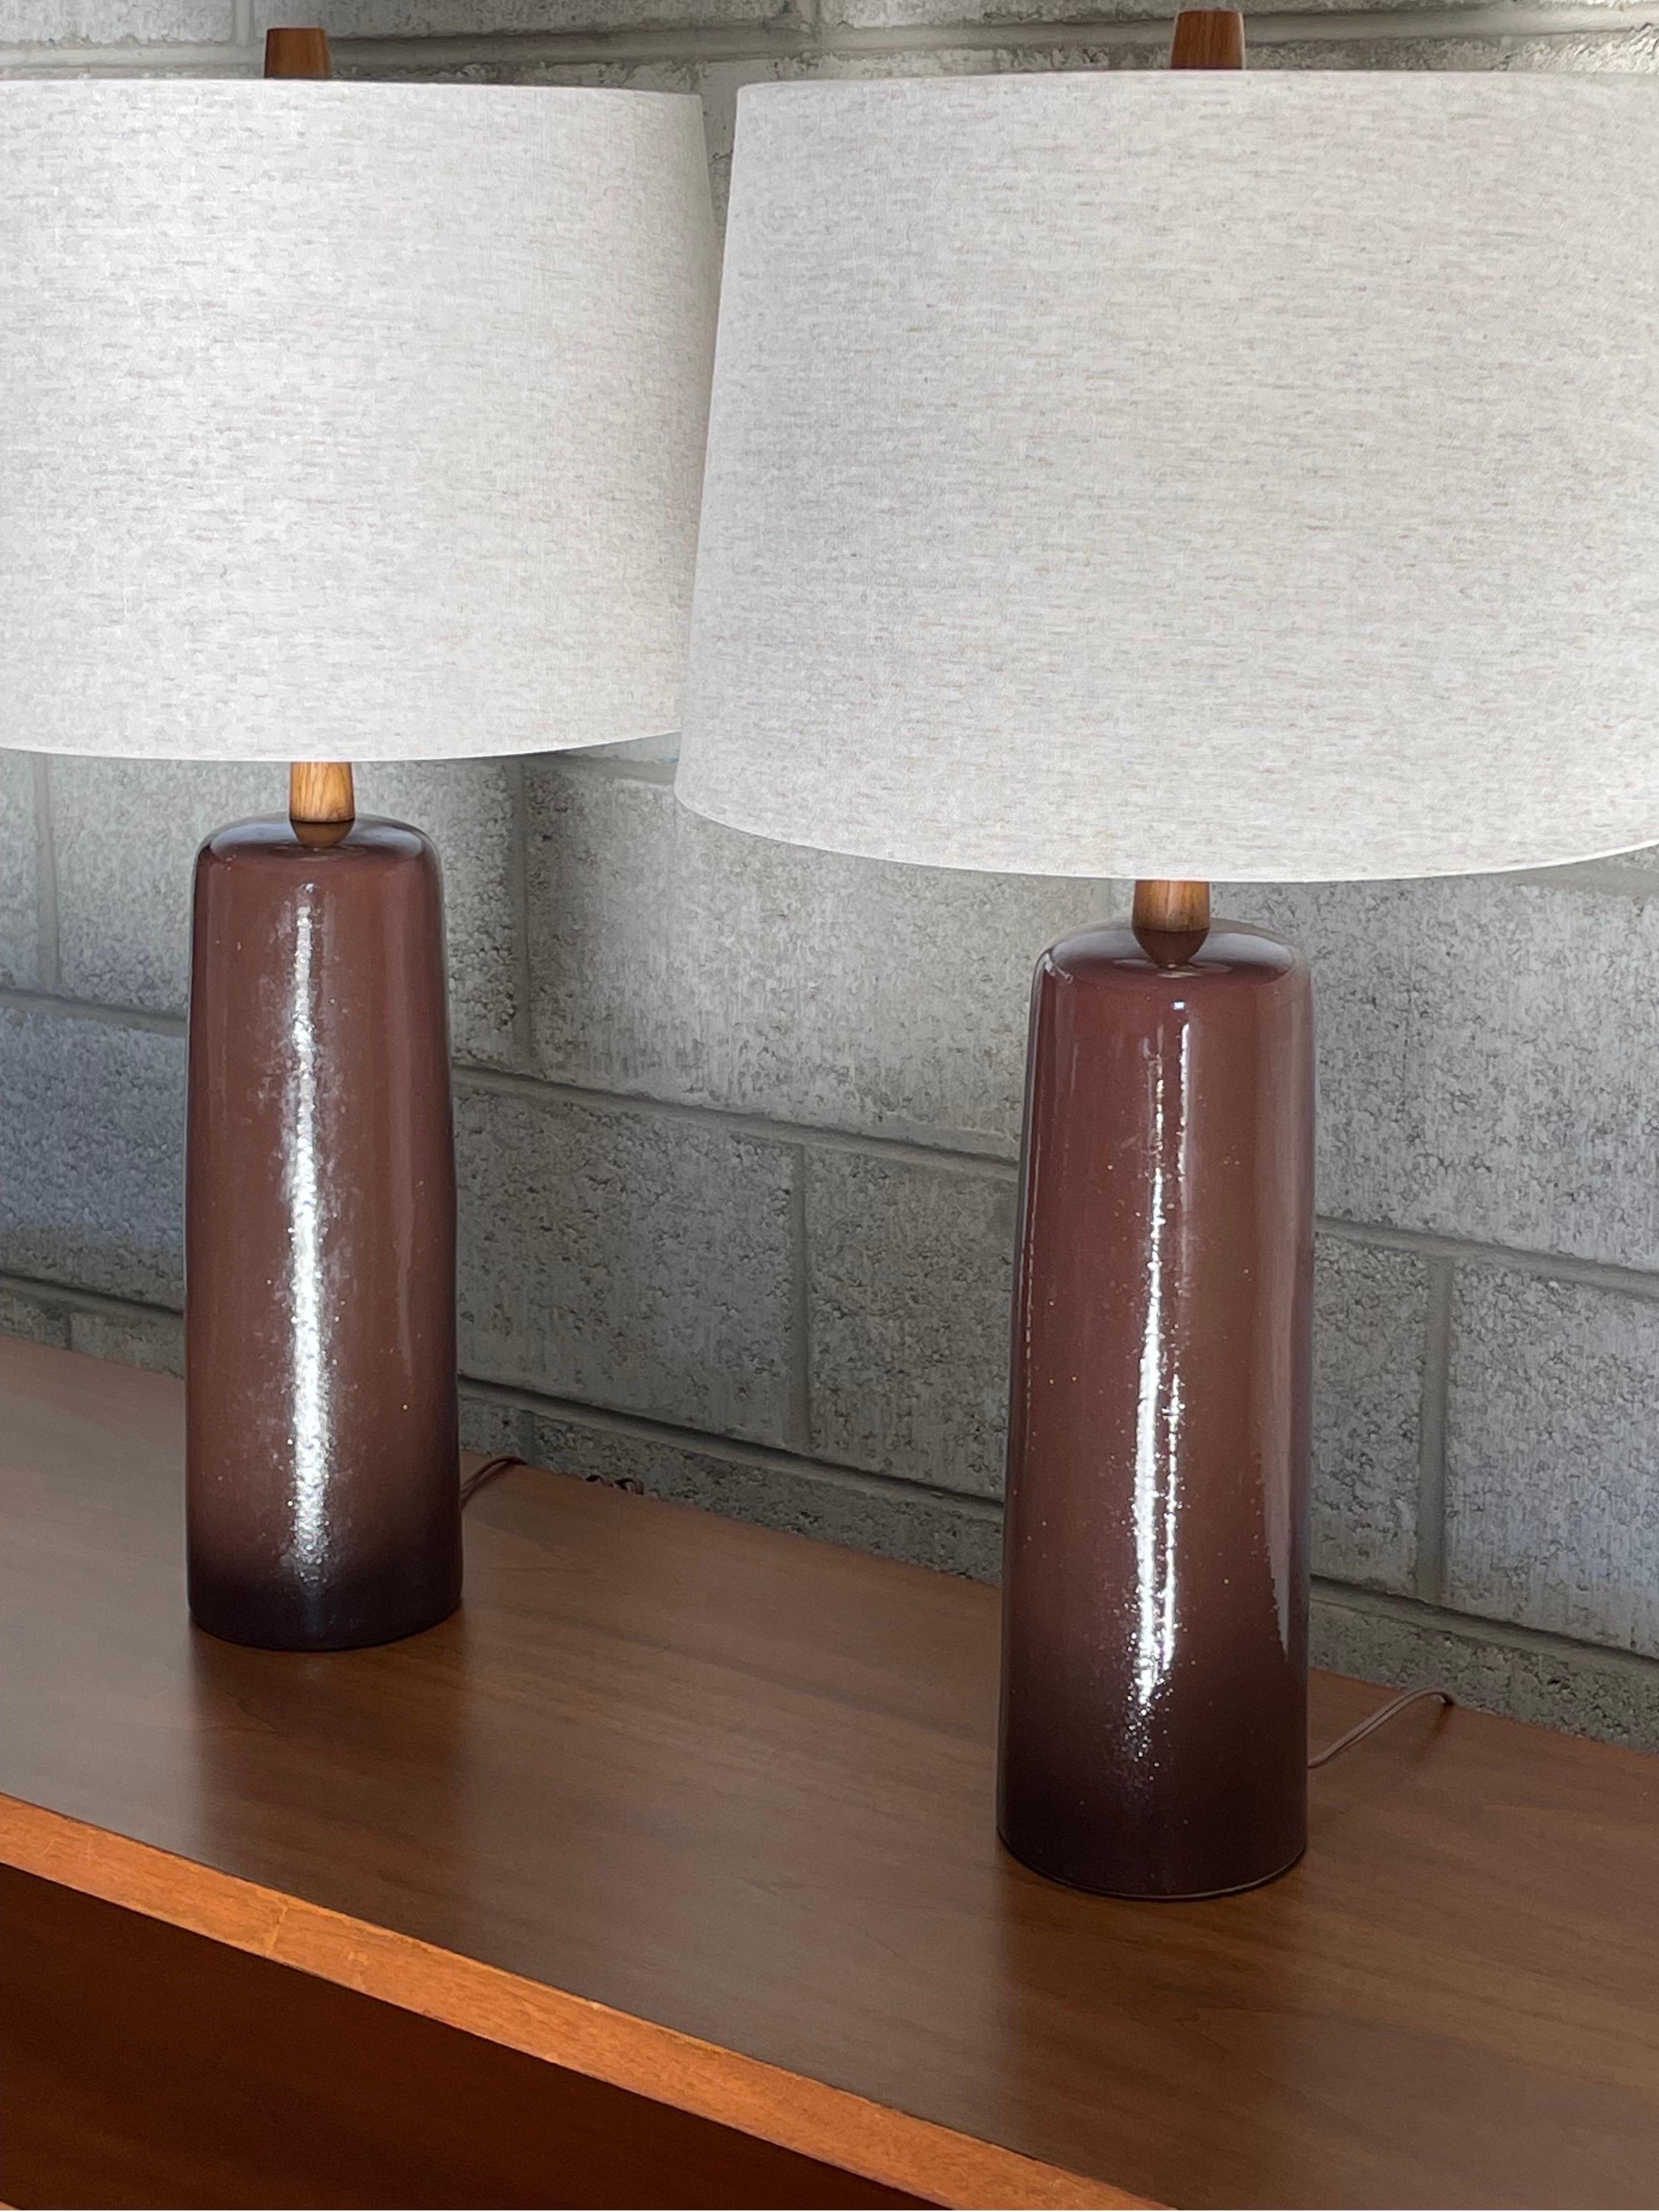 Table lamps designed by ceramicist duo Jane and Gordon Martz for Marshall Studios. Color a brown with some hues of plum.

Dimensions
Overall;
27.25” tall
15” wide 

Ceramic ;
14